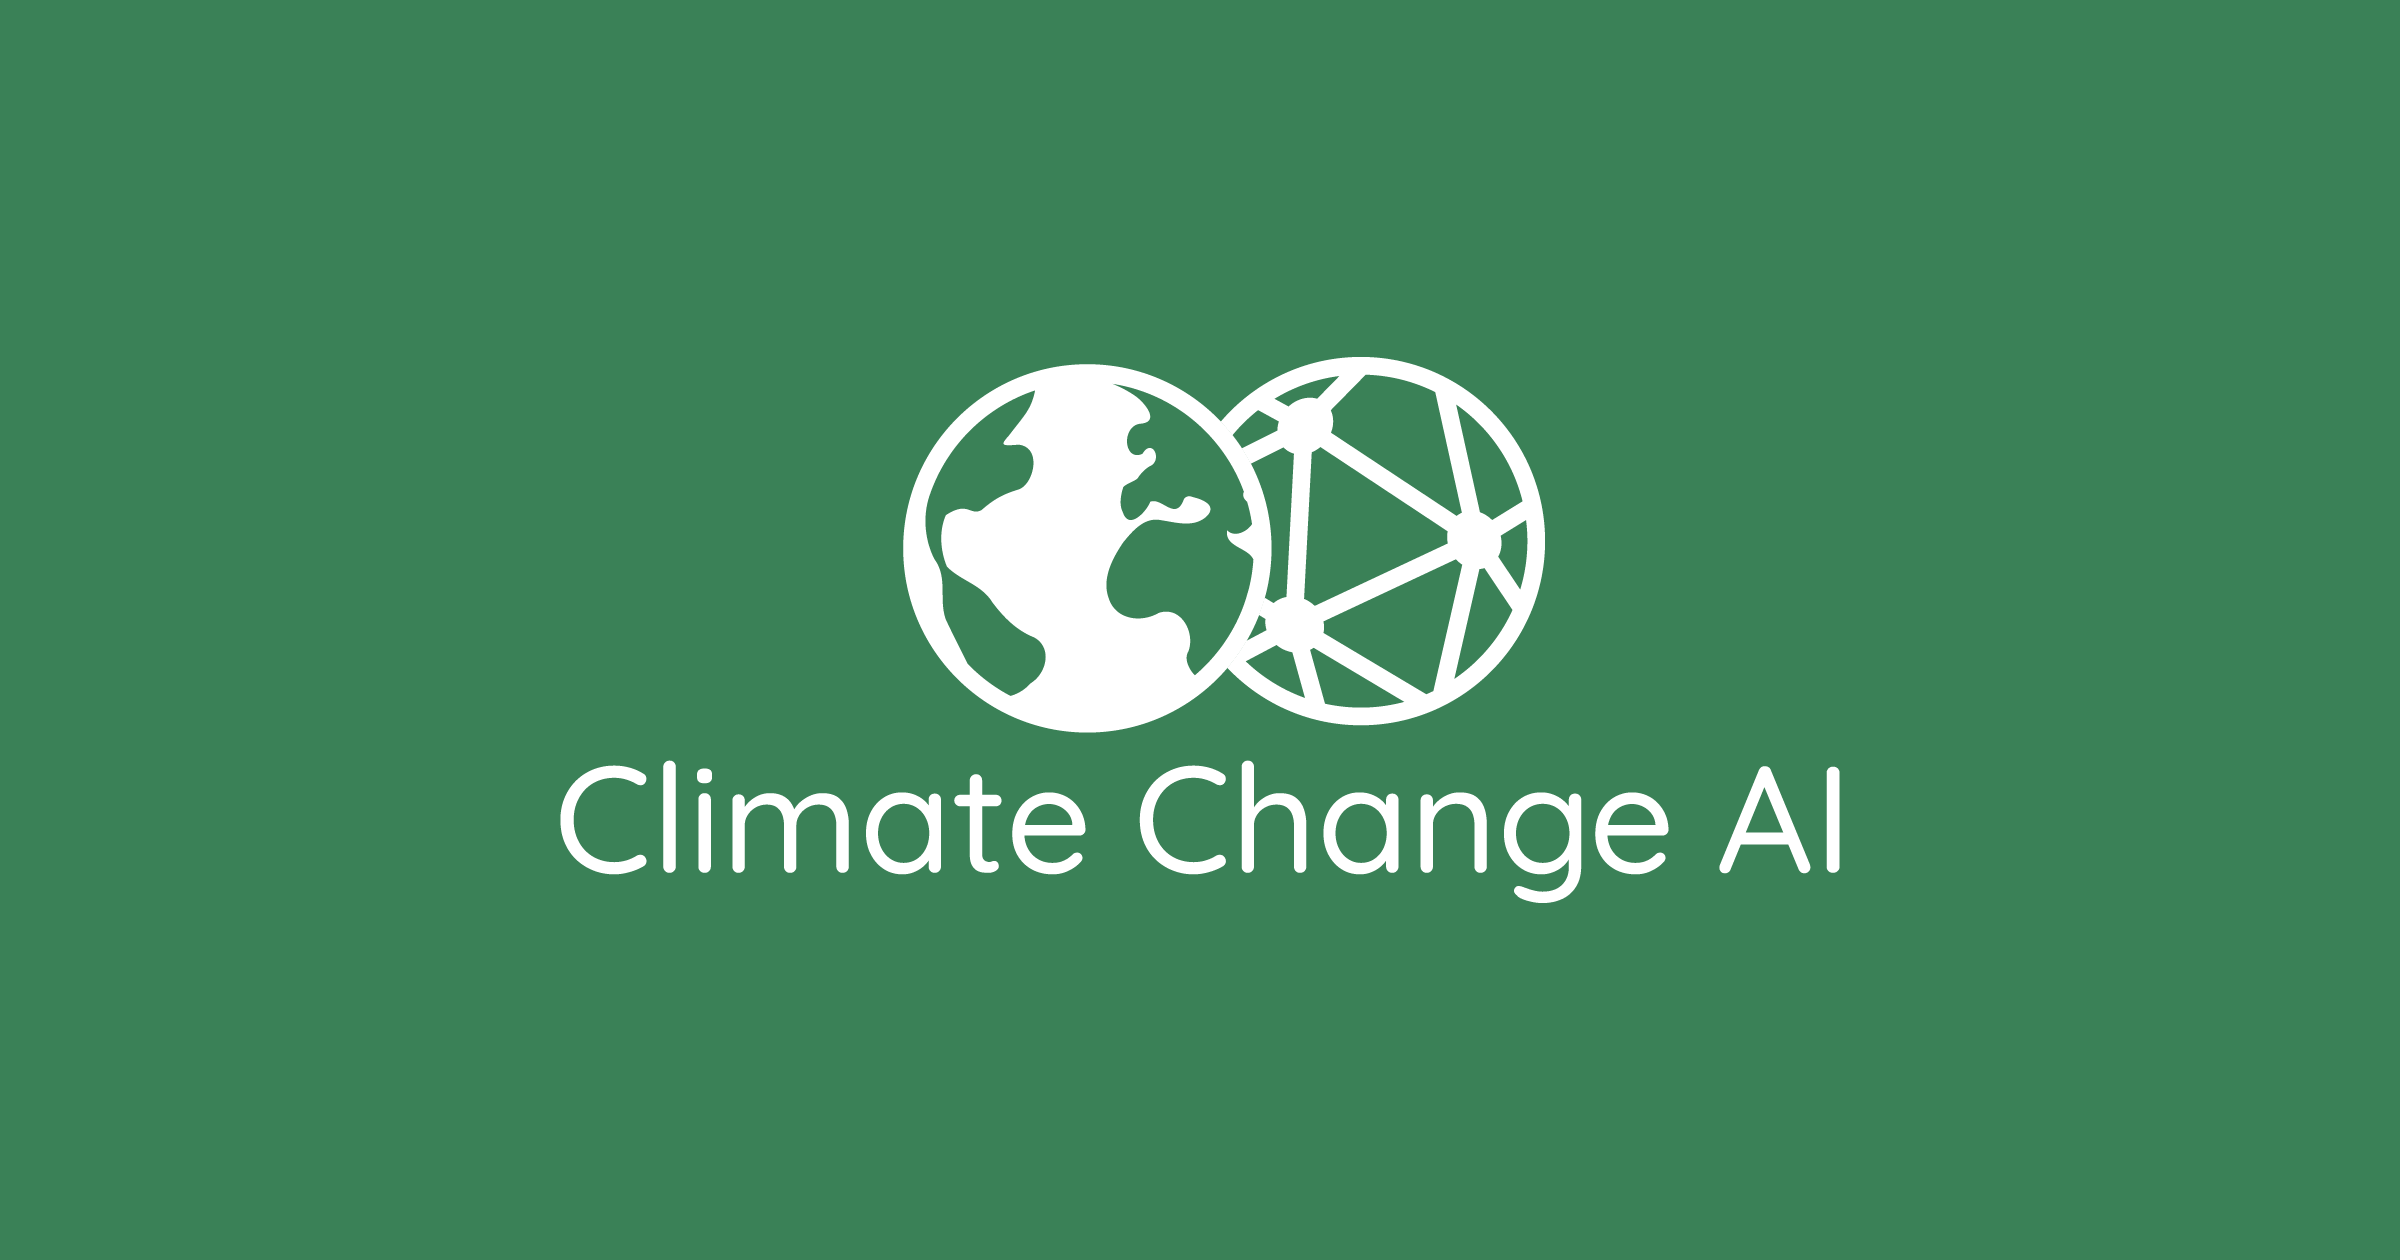 AAAI 2022 Fall Symposium: The Role of AI in Responding to Climate Challenges